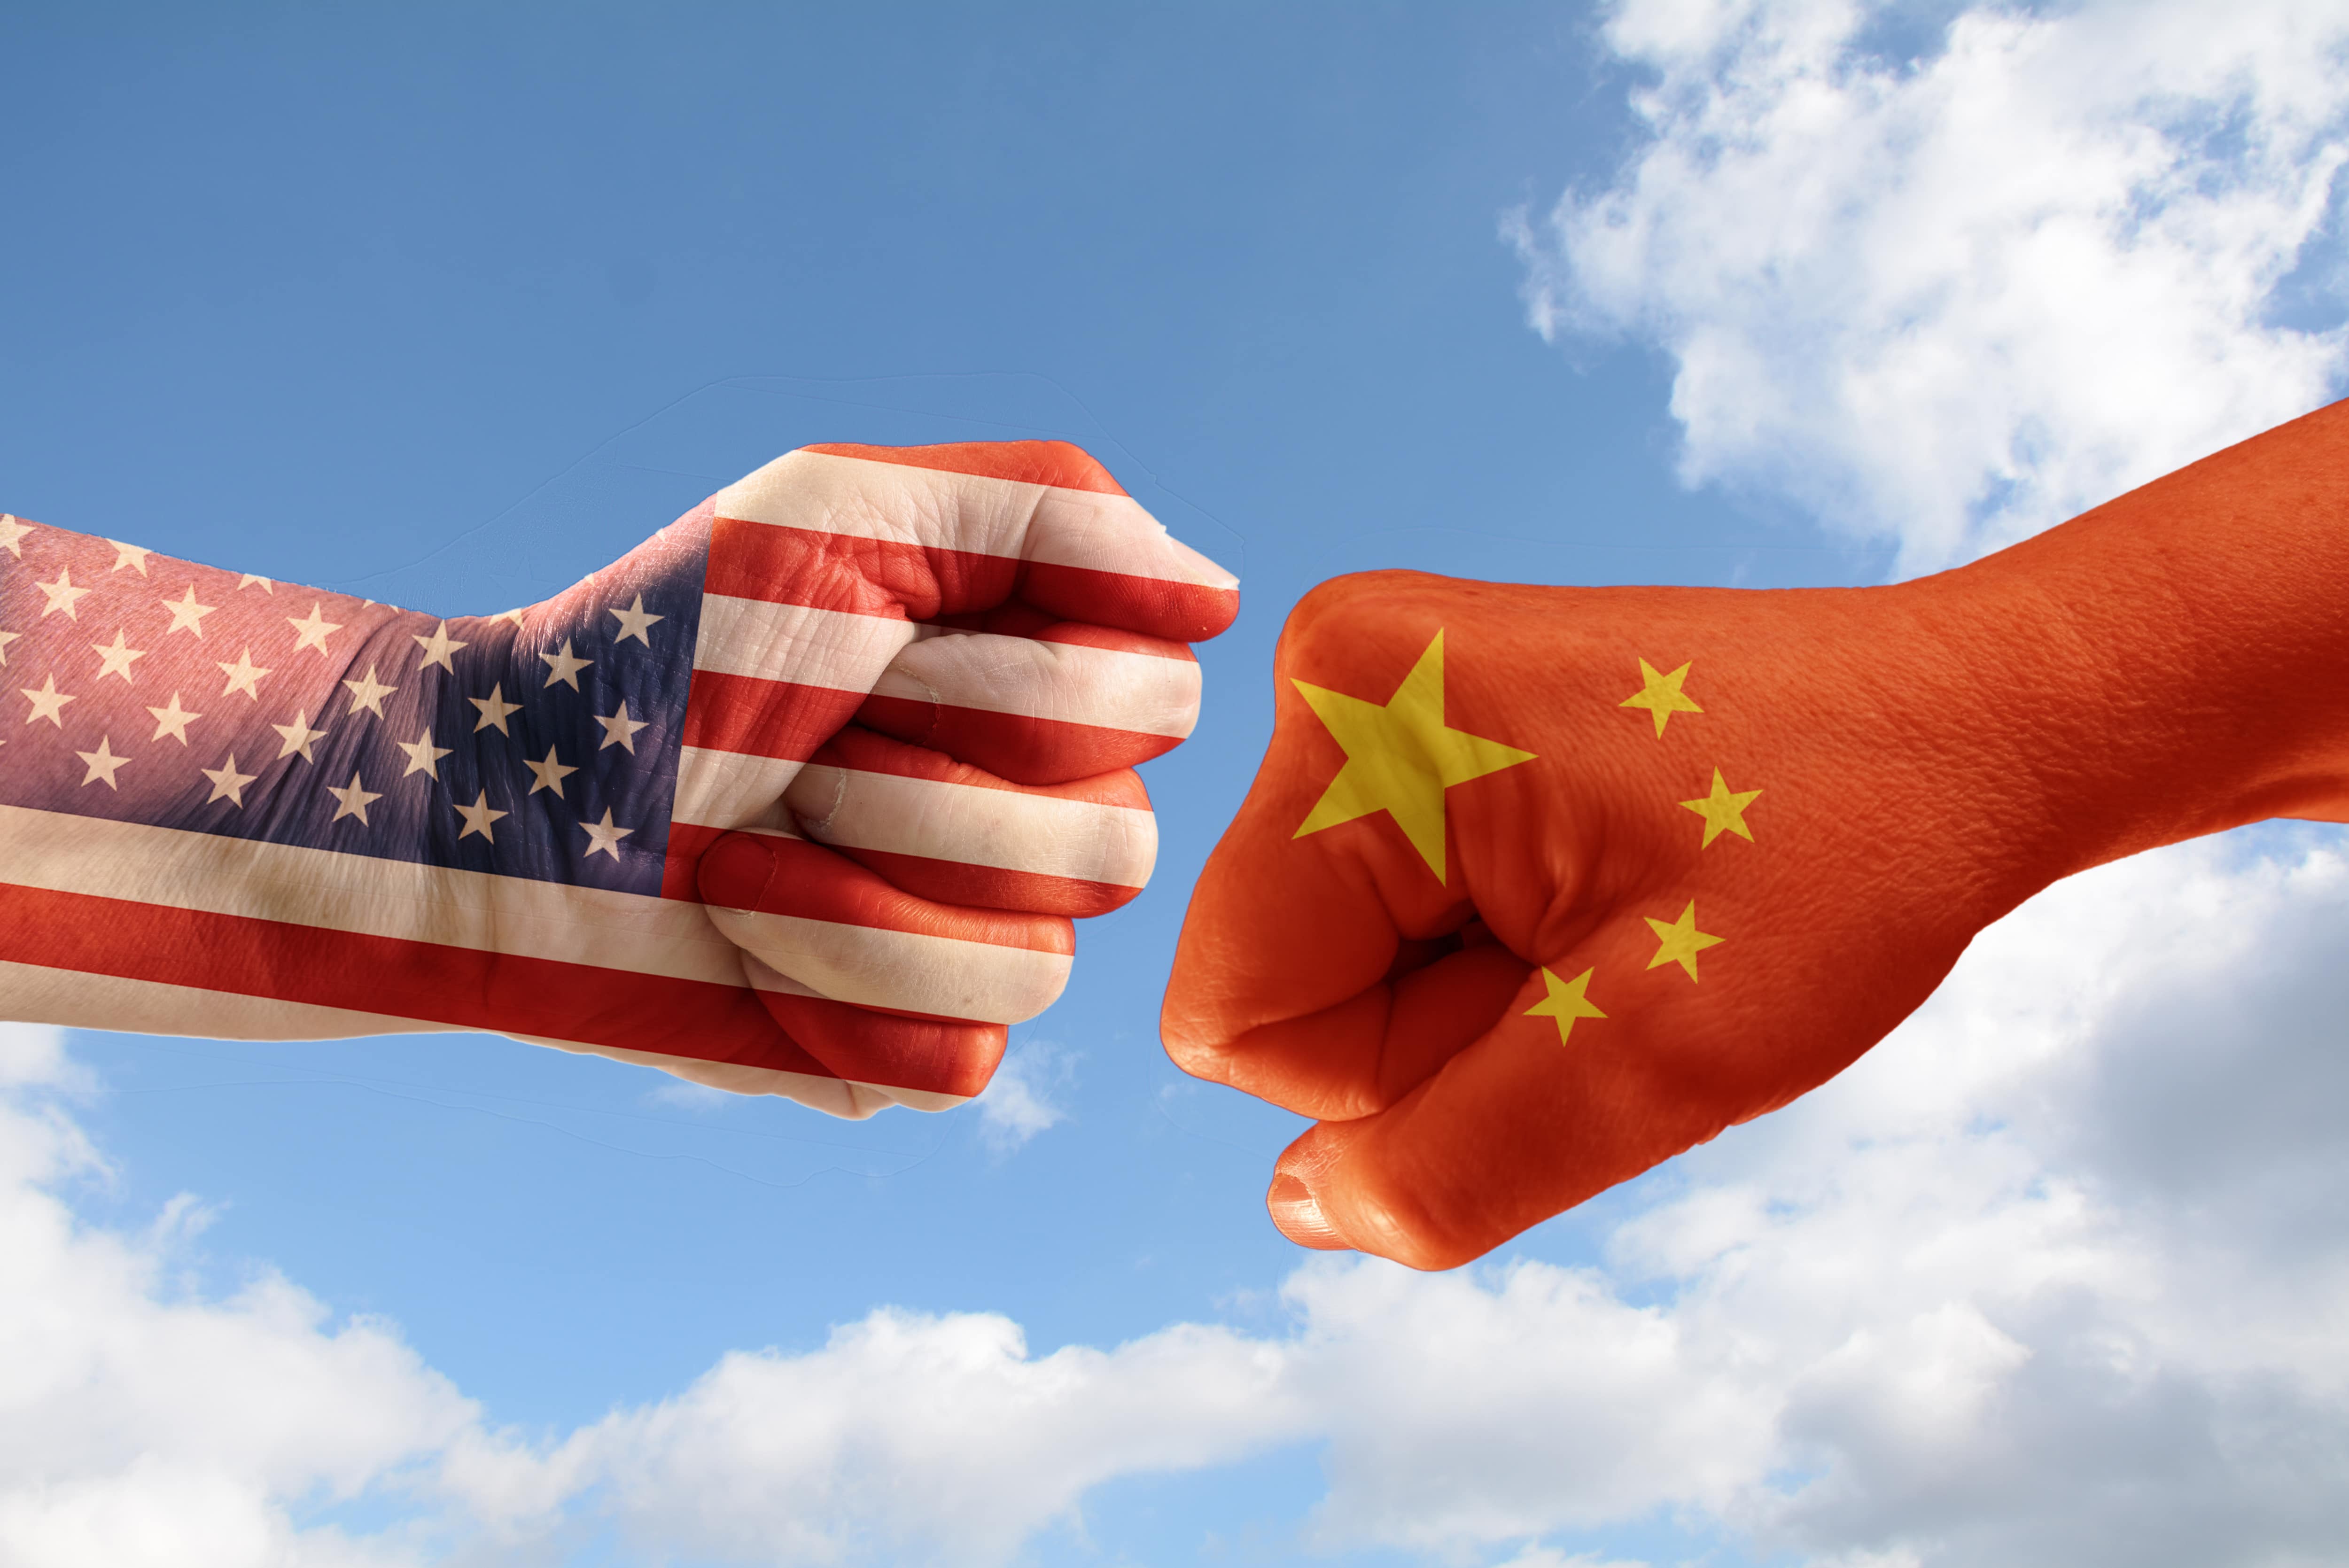 Trade conflict, fists with the flags of USA and China against each